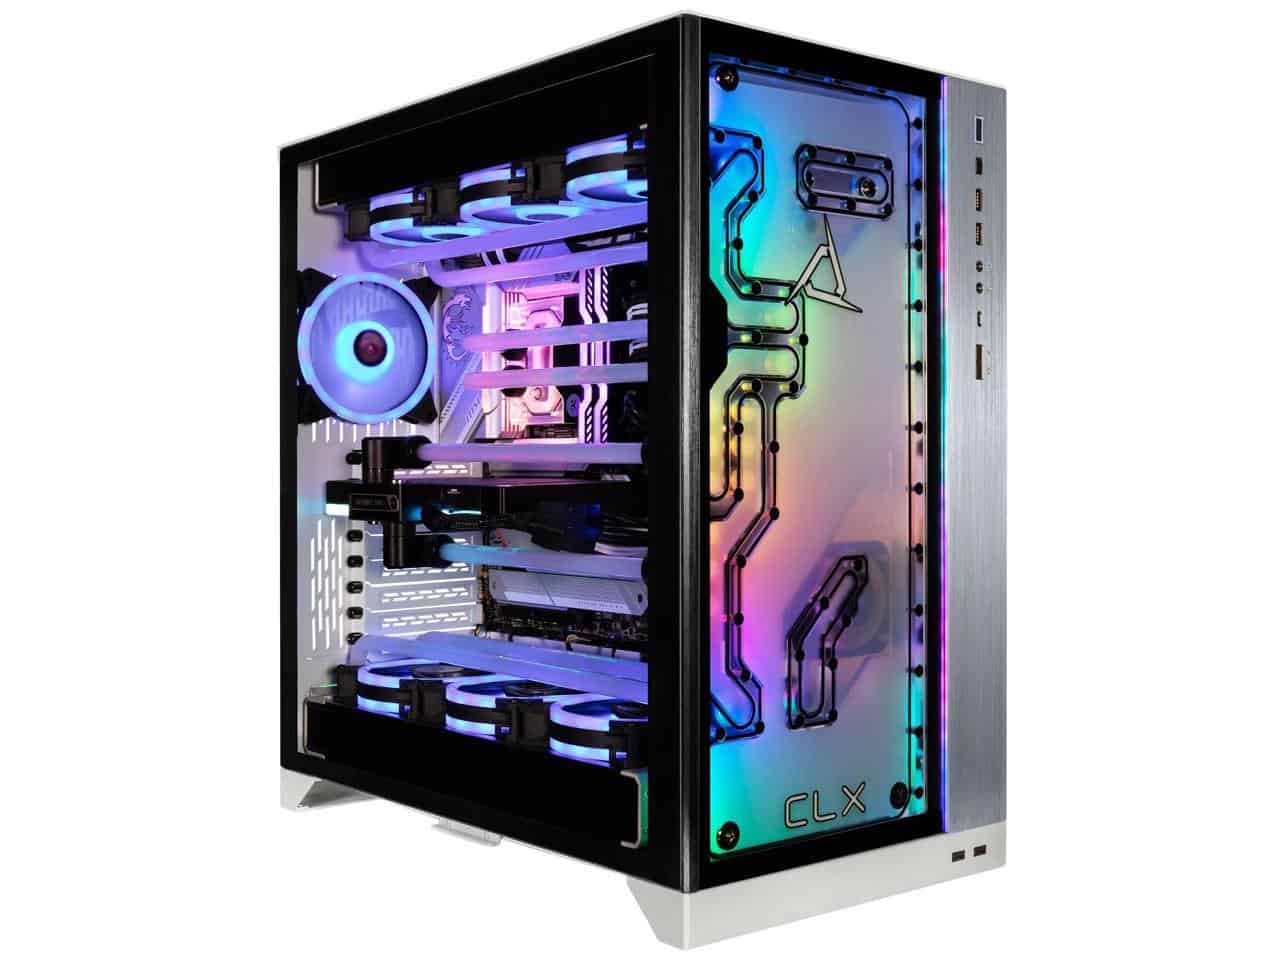 A prebuilt gaming PC featuring a rainbow colored fan.